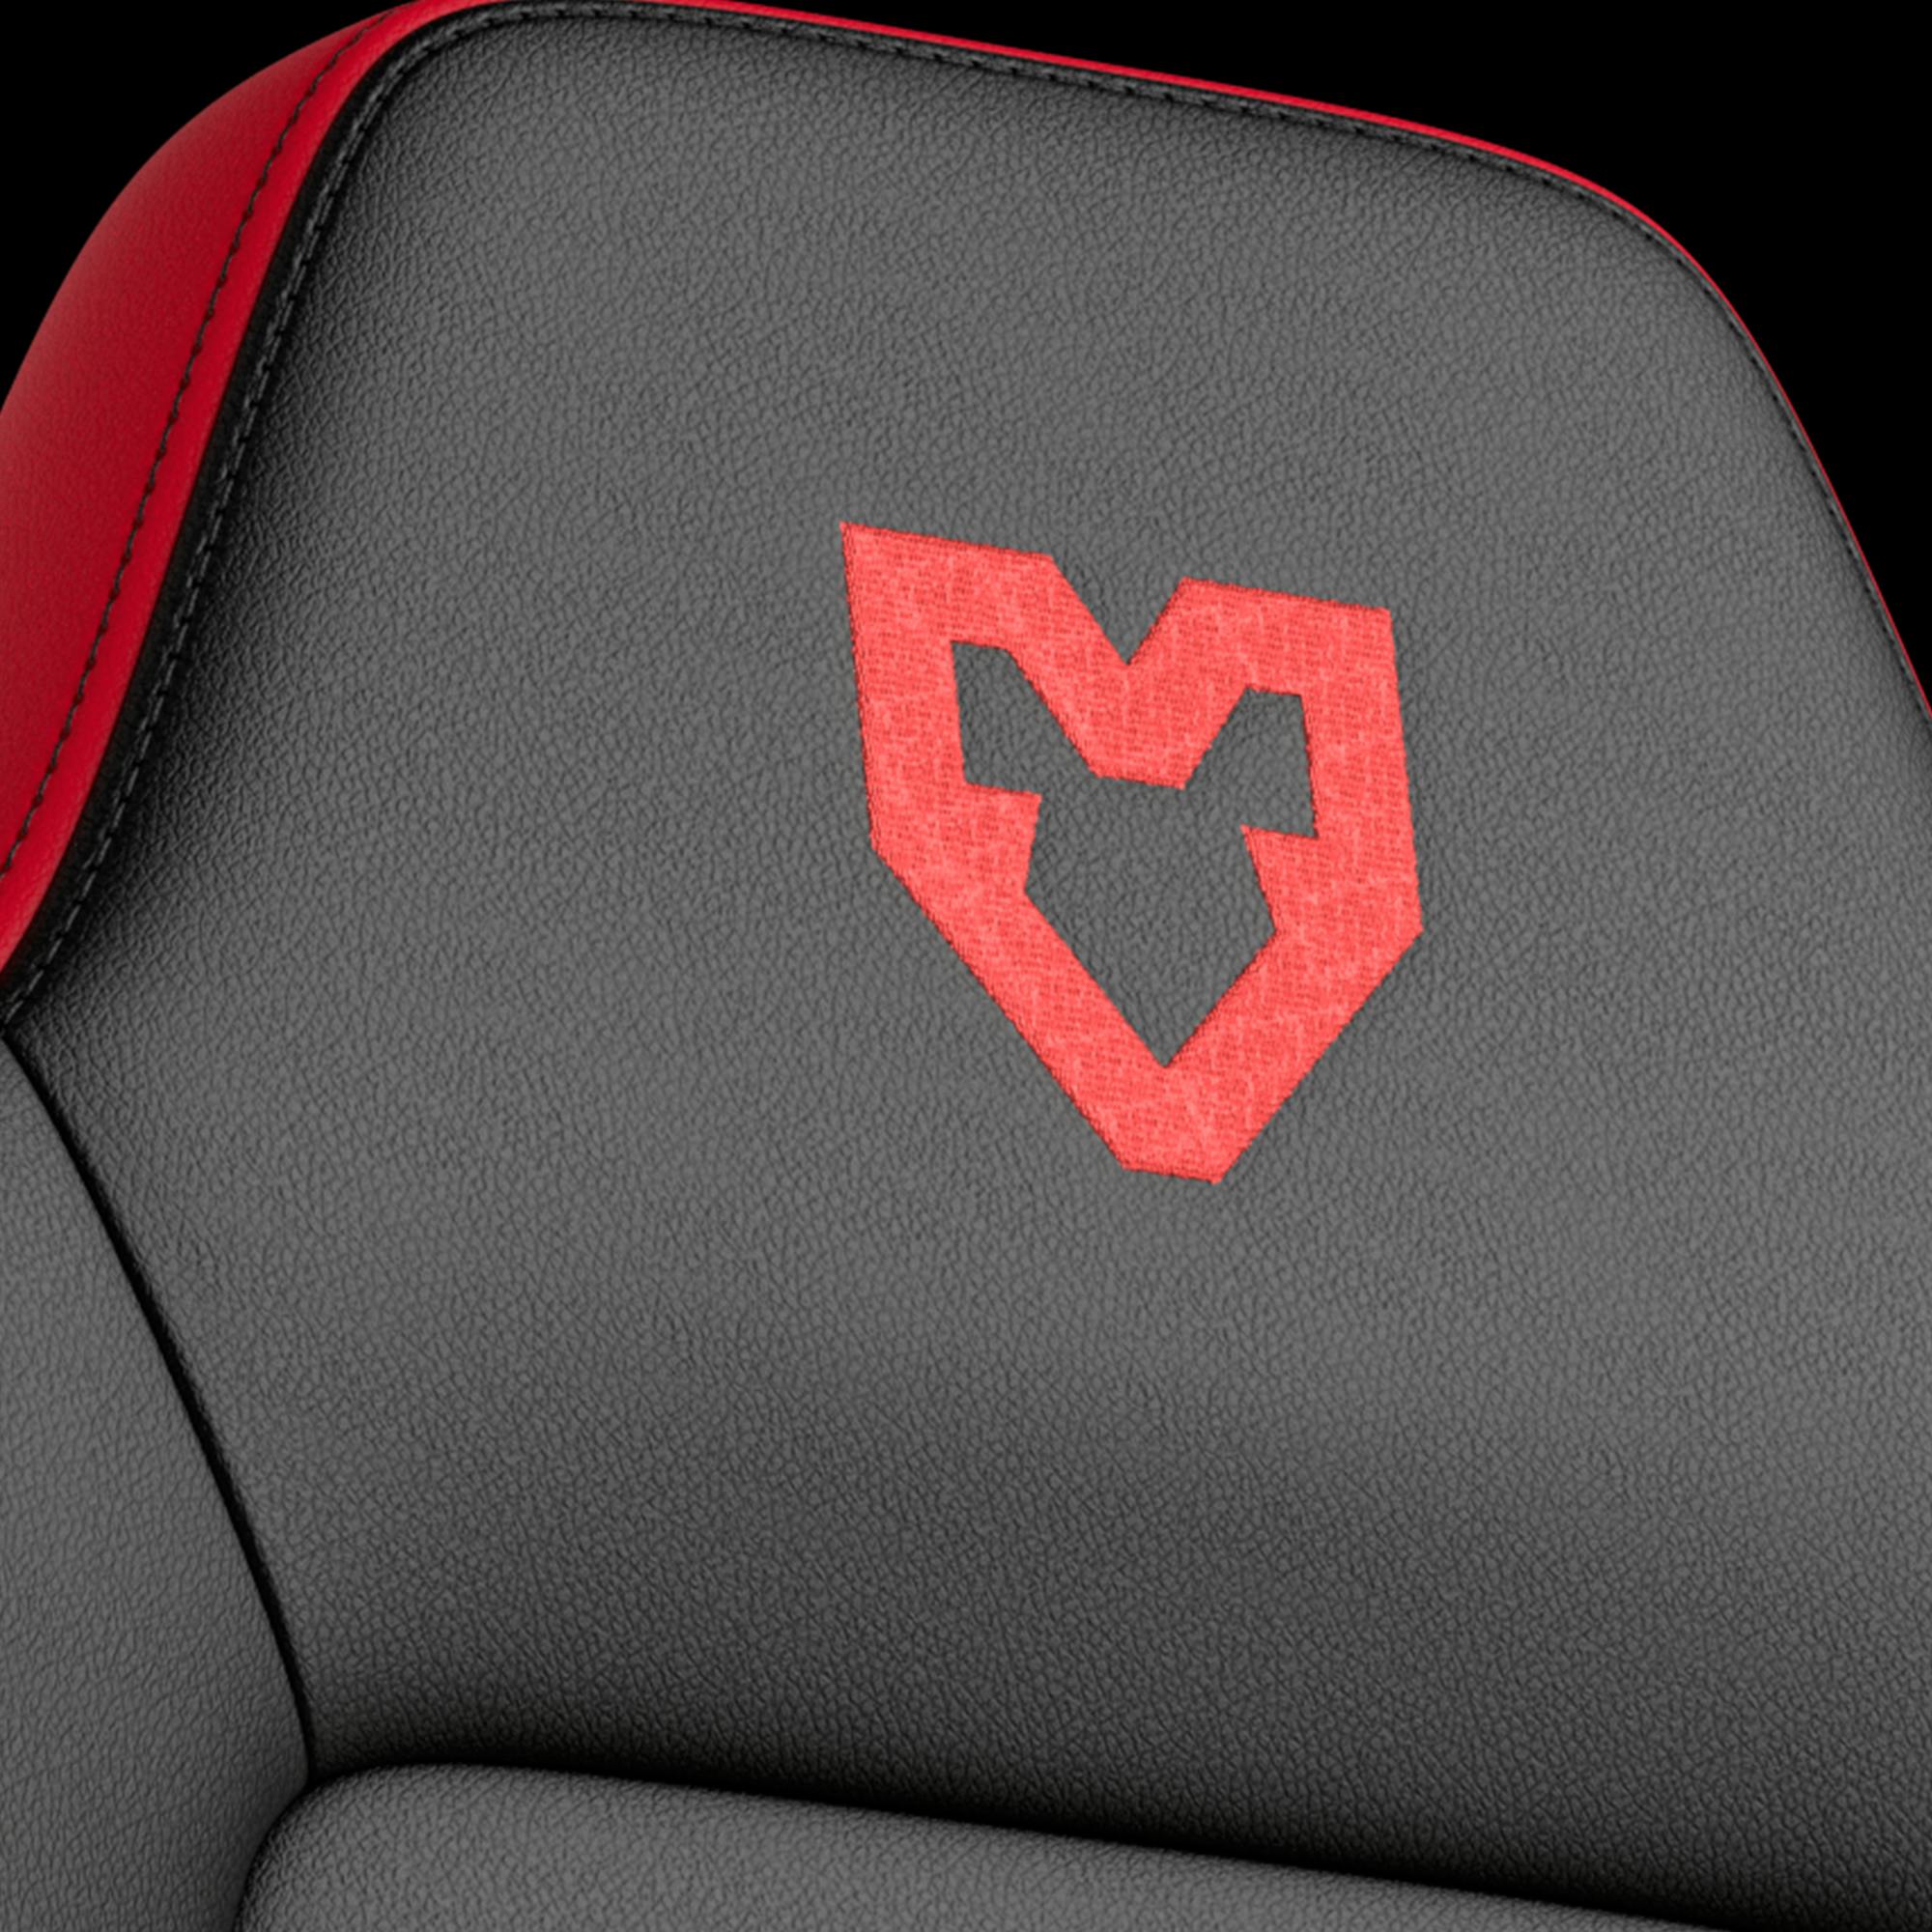 Gaming Chair MOUZ Esports Vegan PU Leather Highlighted Details View